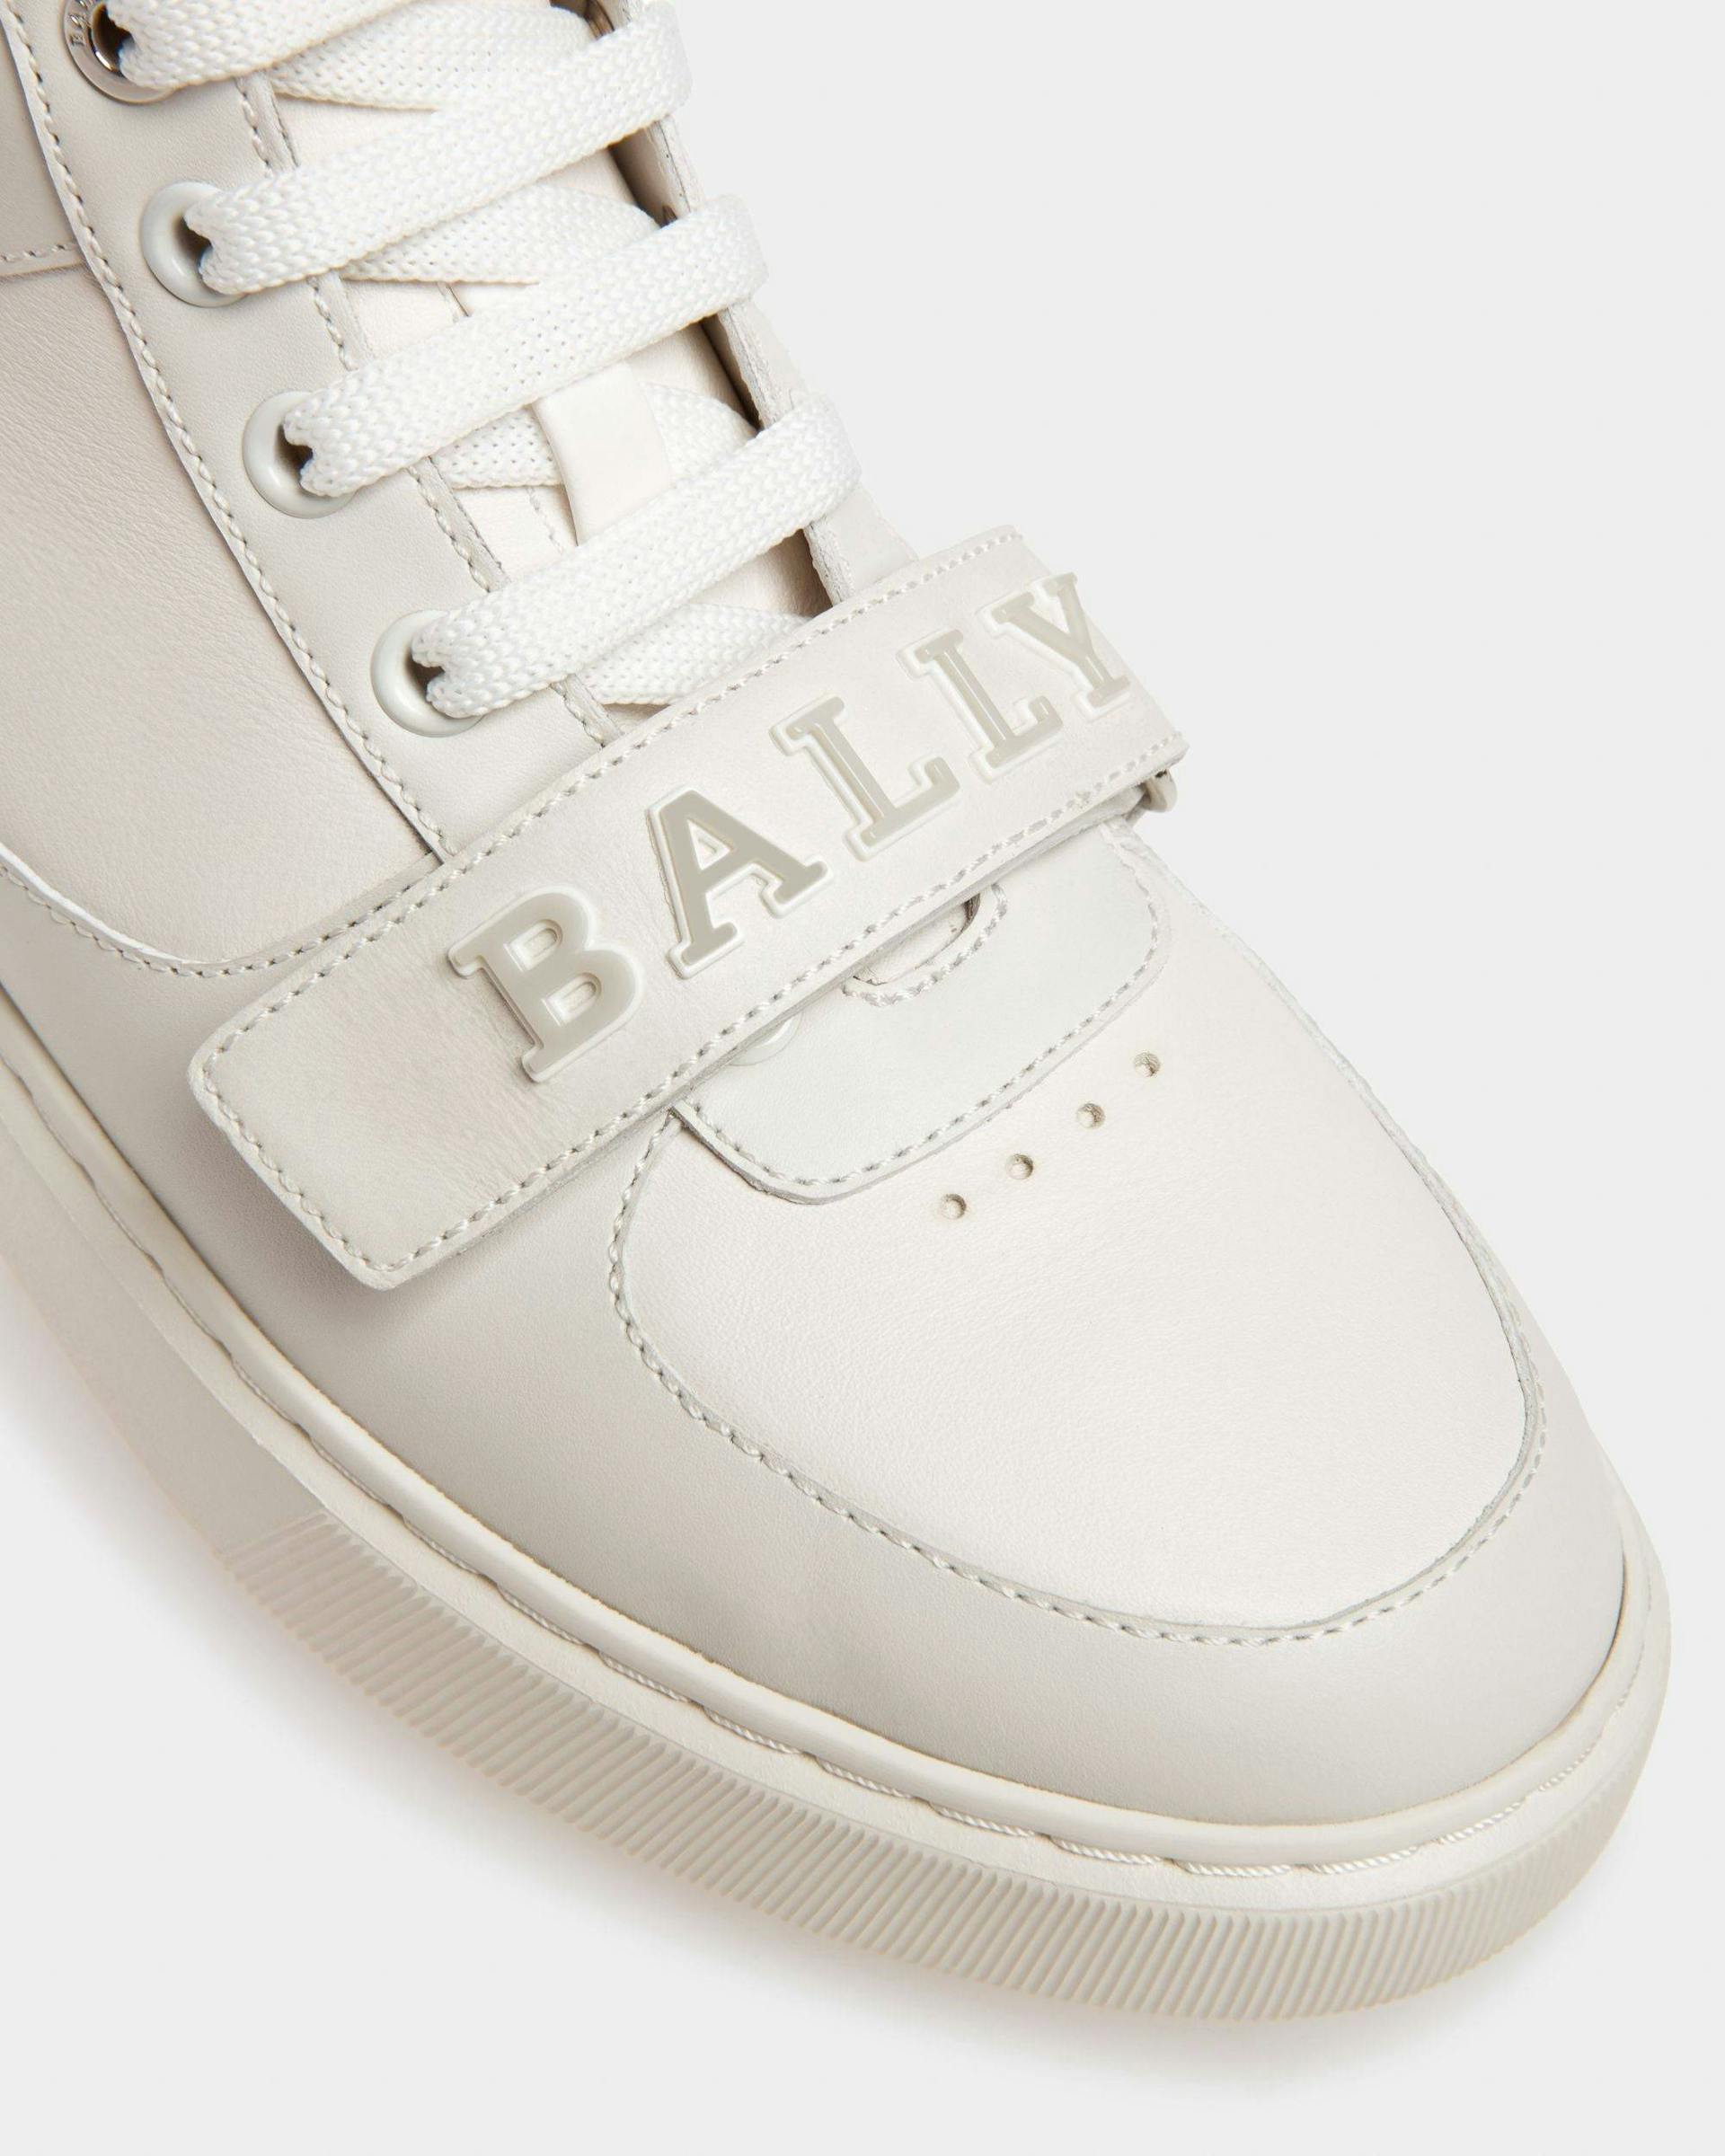 Merryk Leather Sneakers In White - Women's - Bally - 06